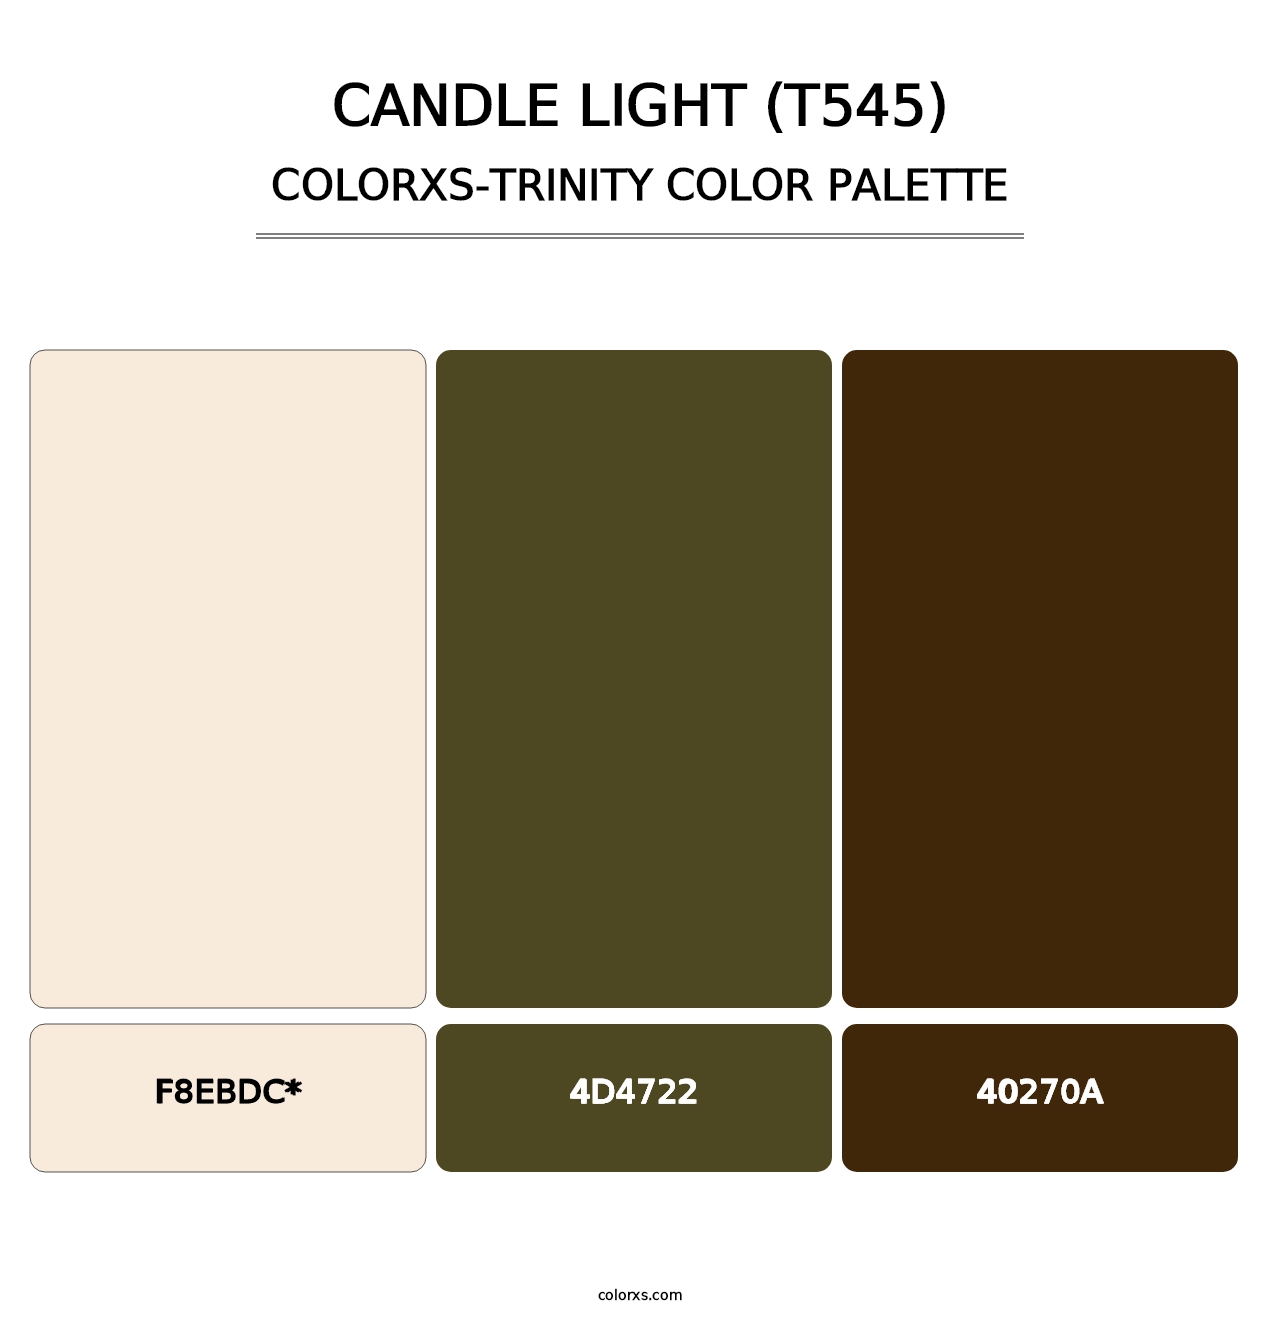 Candle Light (T545) - Colorxs Trinity Palette